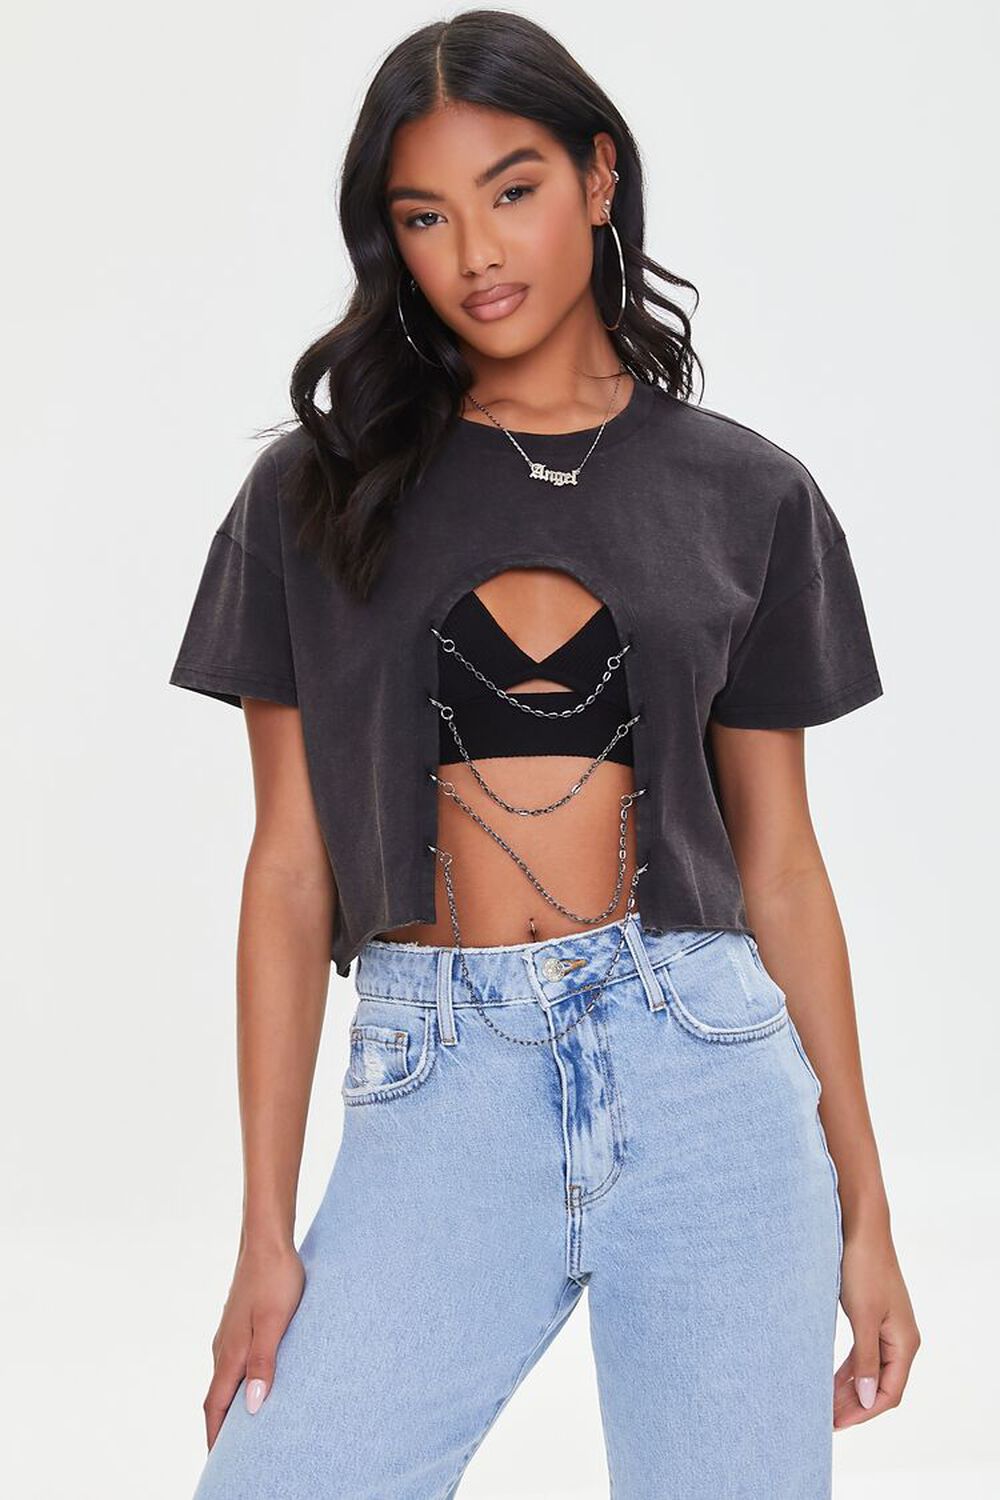 BLACK Cutout Chain Cropped Tee, image 1